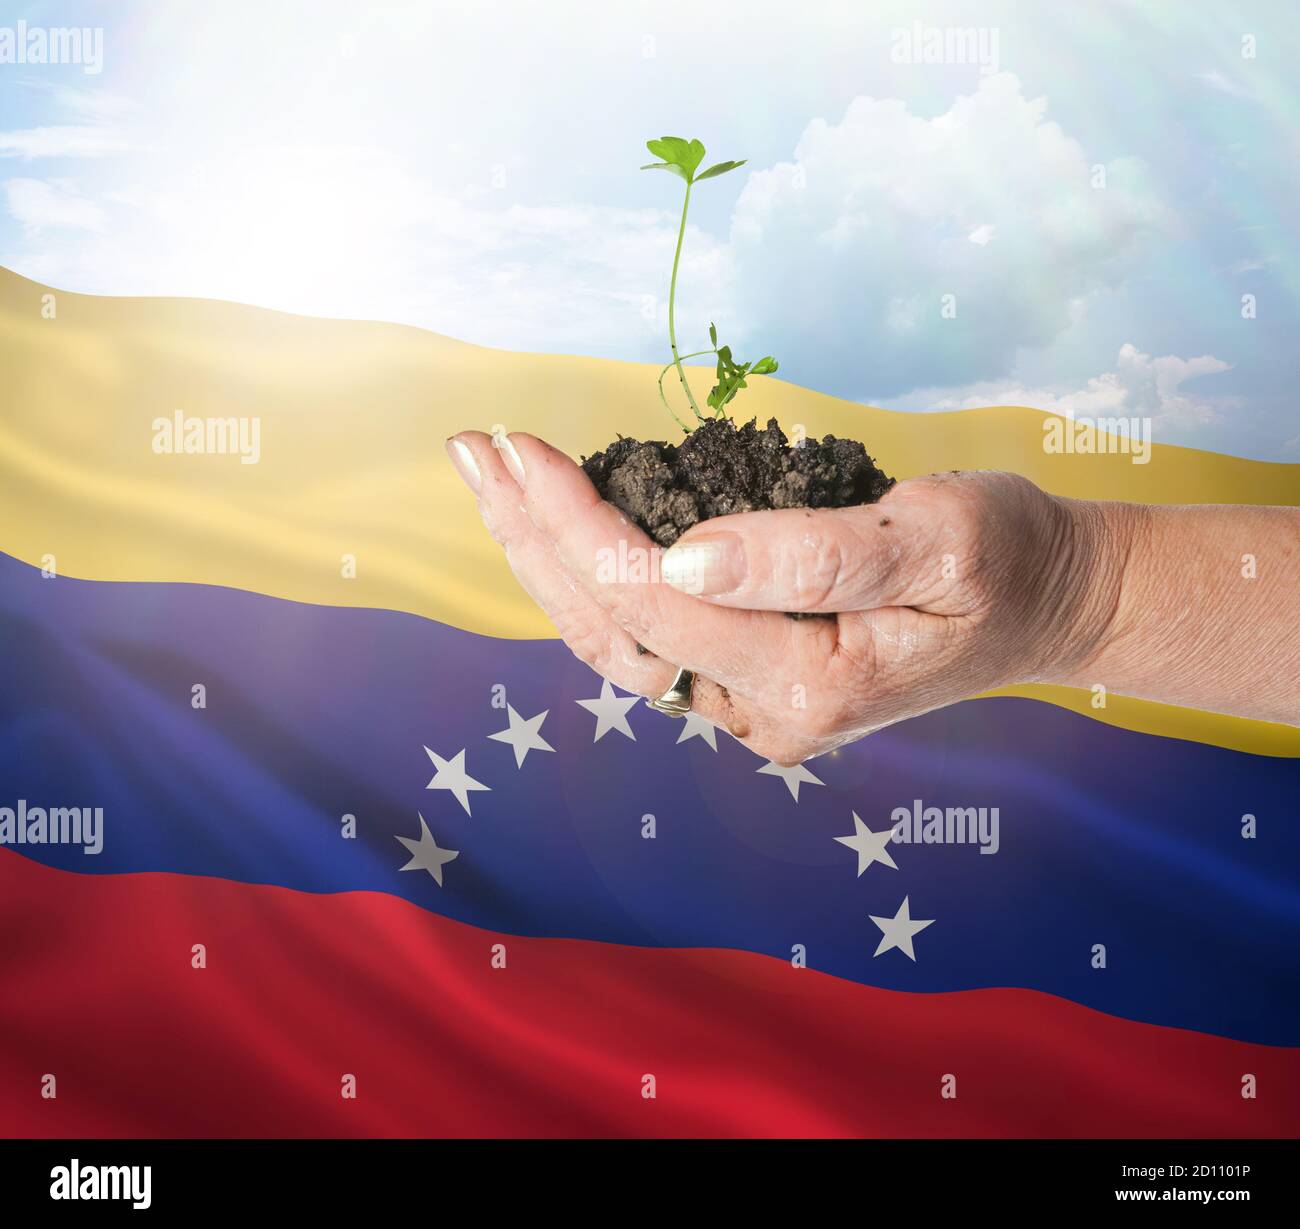 Venezuela growth and new beginning. Green renewable energy and ecology concept. Hand holding young plant. Stock Photo